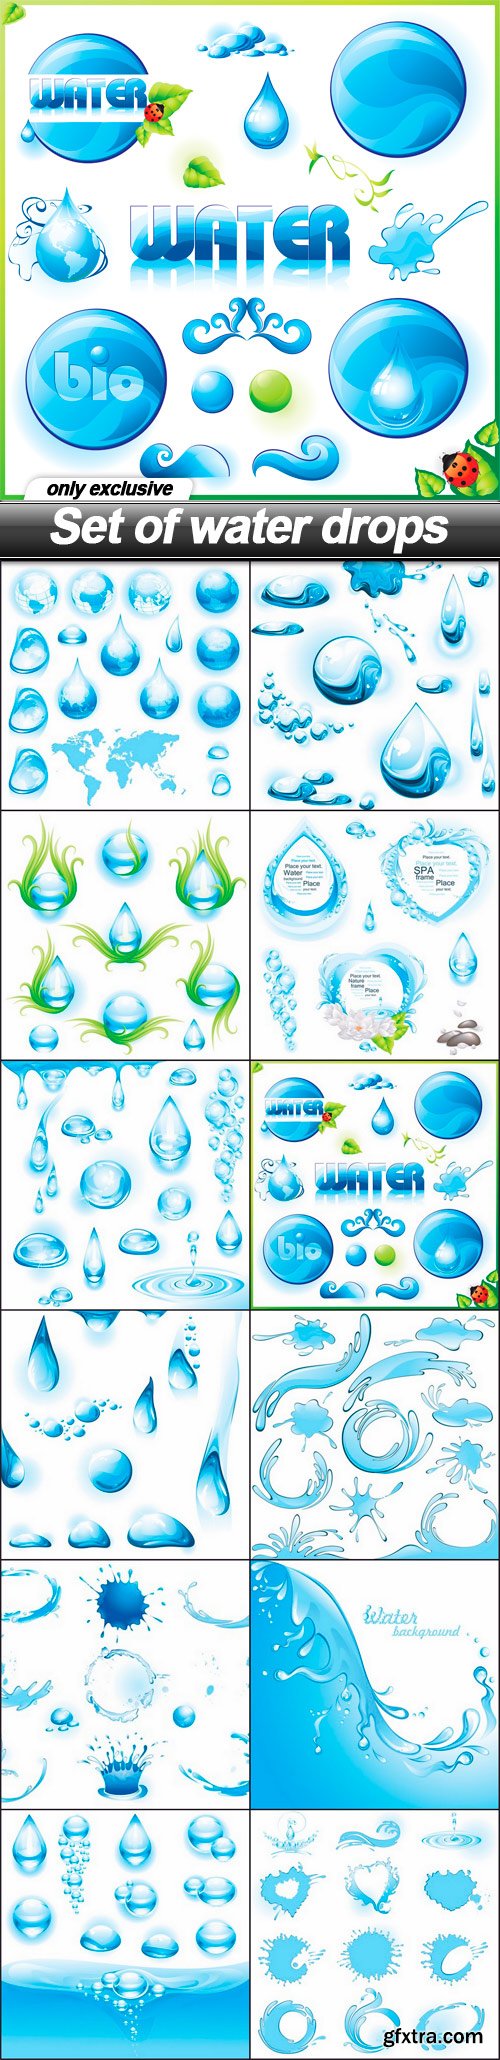 Set of water drops - 12 EPS